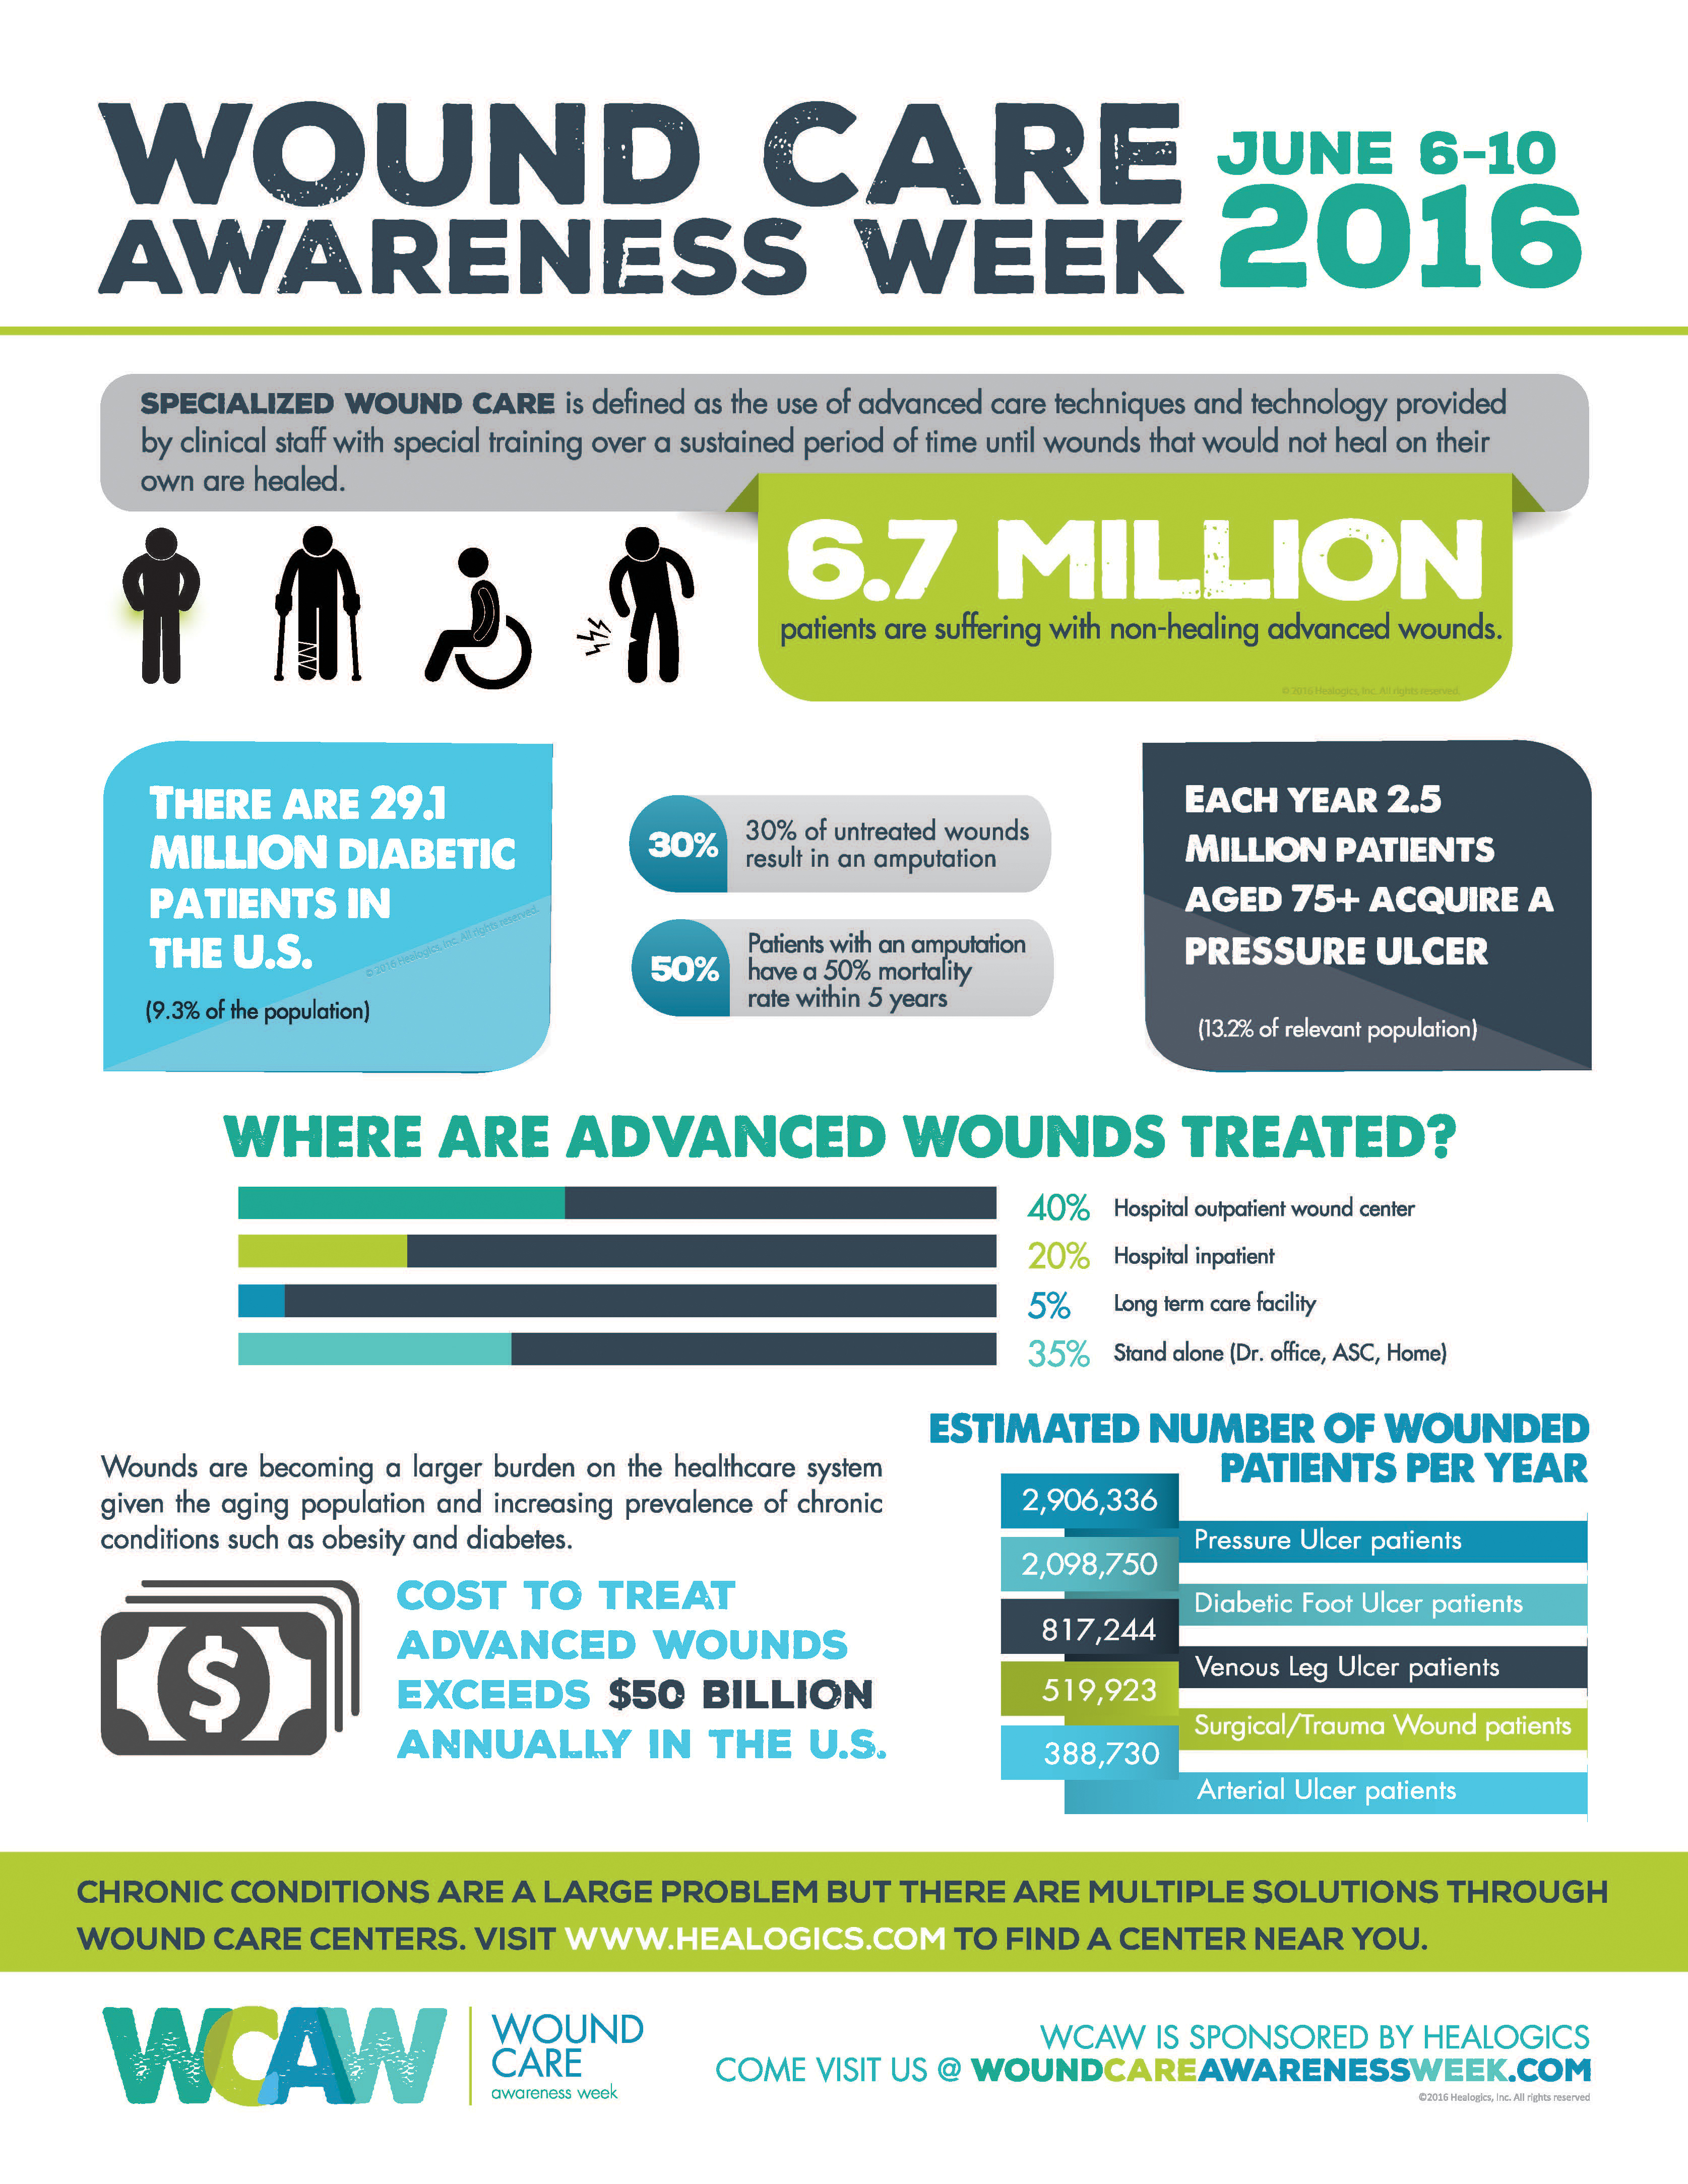 Wound Care Awareness Week Highlights Chronic Wound Epidemic In Us